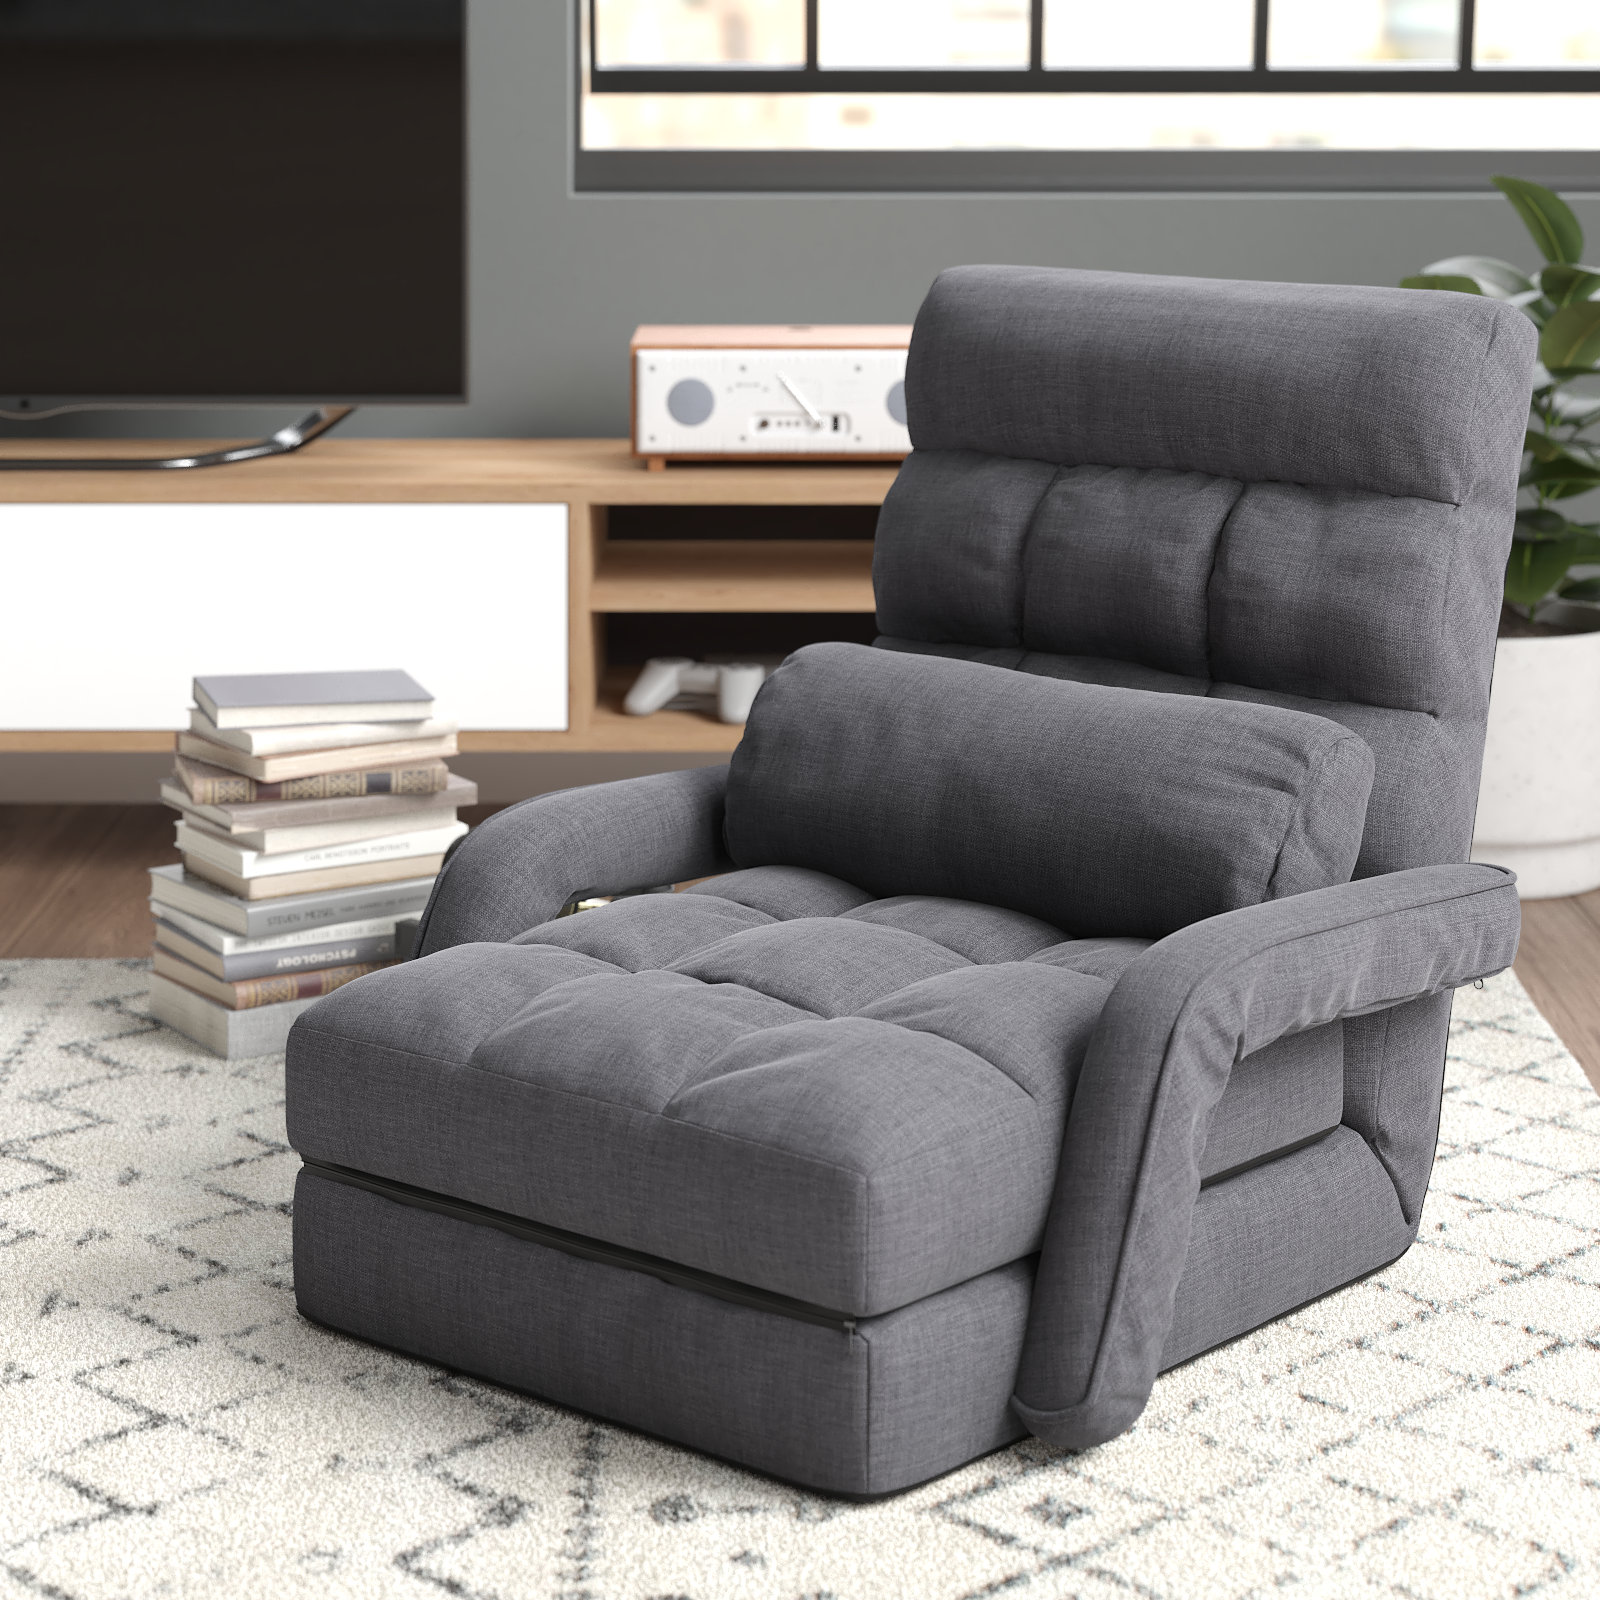 Adjustable Folding Lazy Sofa Chair 5-Position Lounge Couch Back